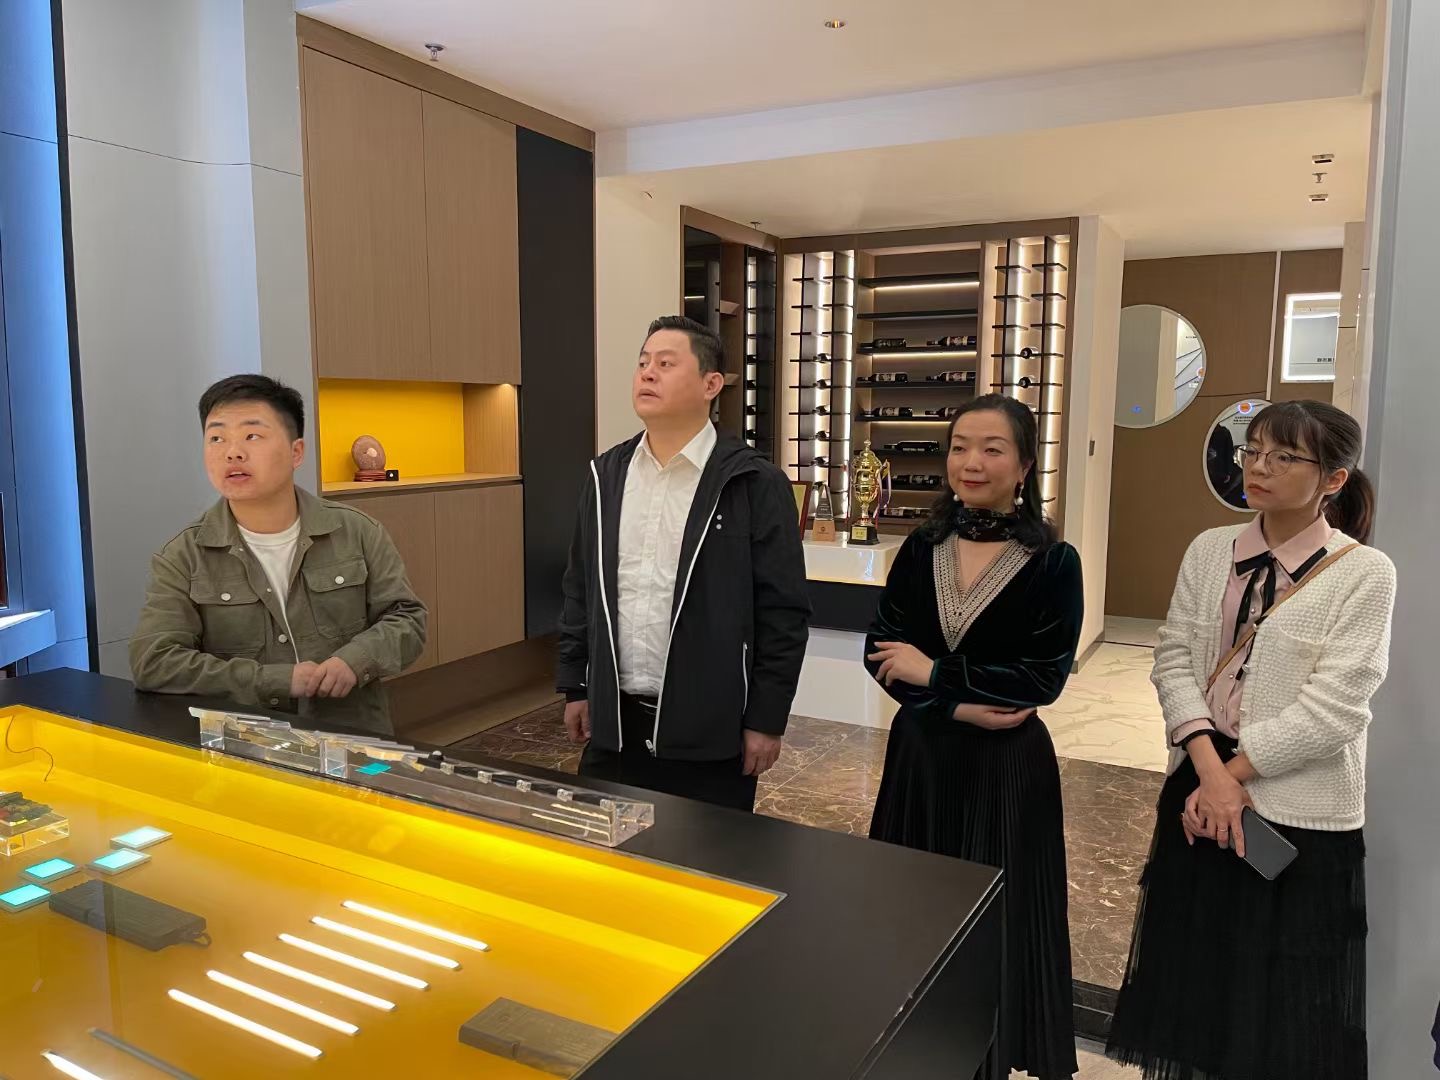 Zhang Chuanxi, Executive Chairman of the Furniture and Decoration Chamber of Commerce of the All-China Federation of Industry and Commerce, and his party visited Jedver